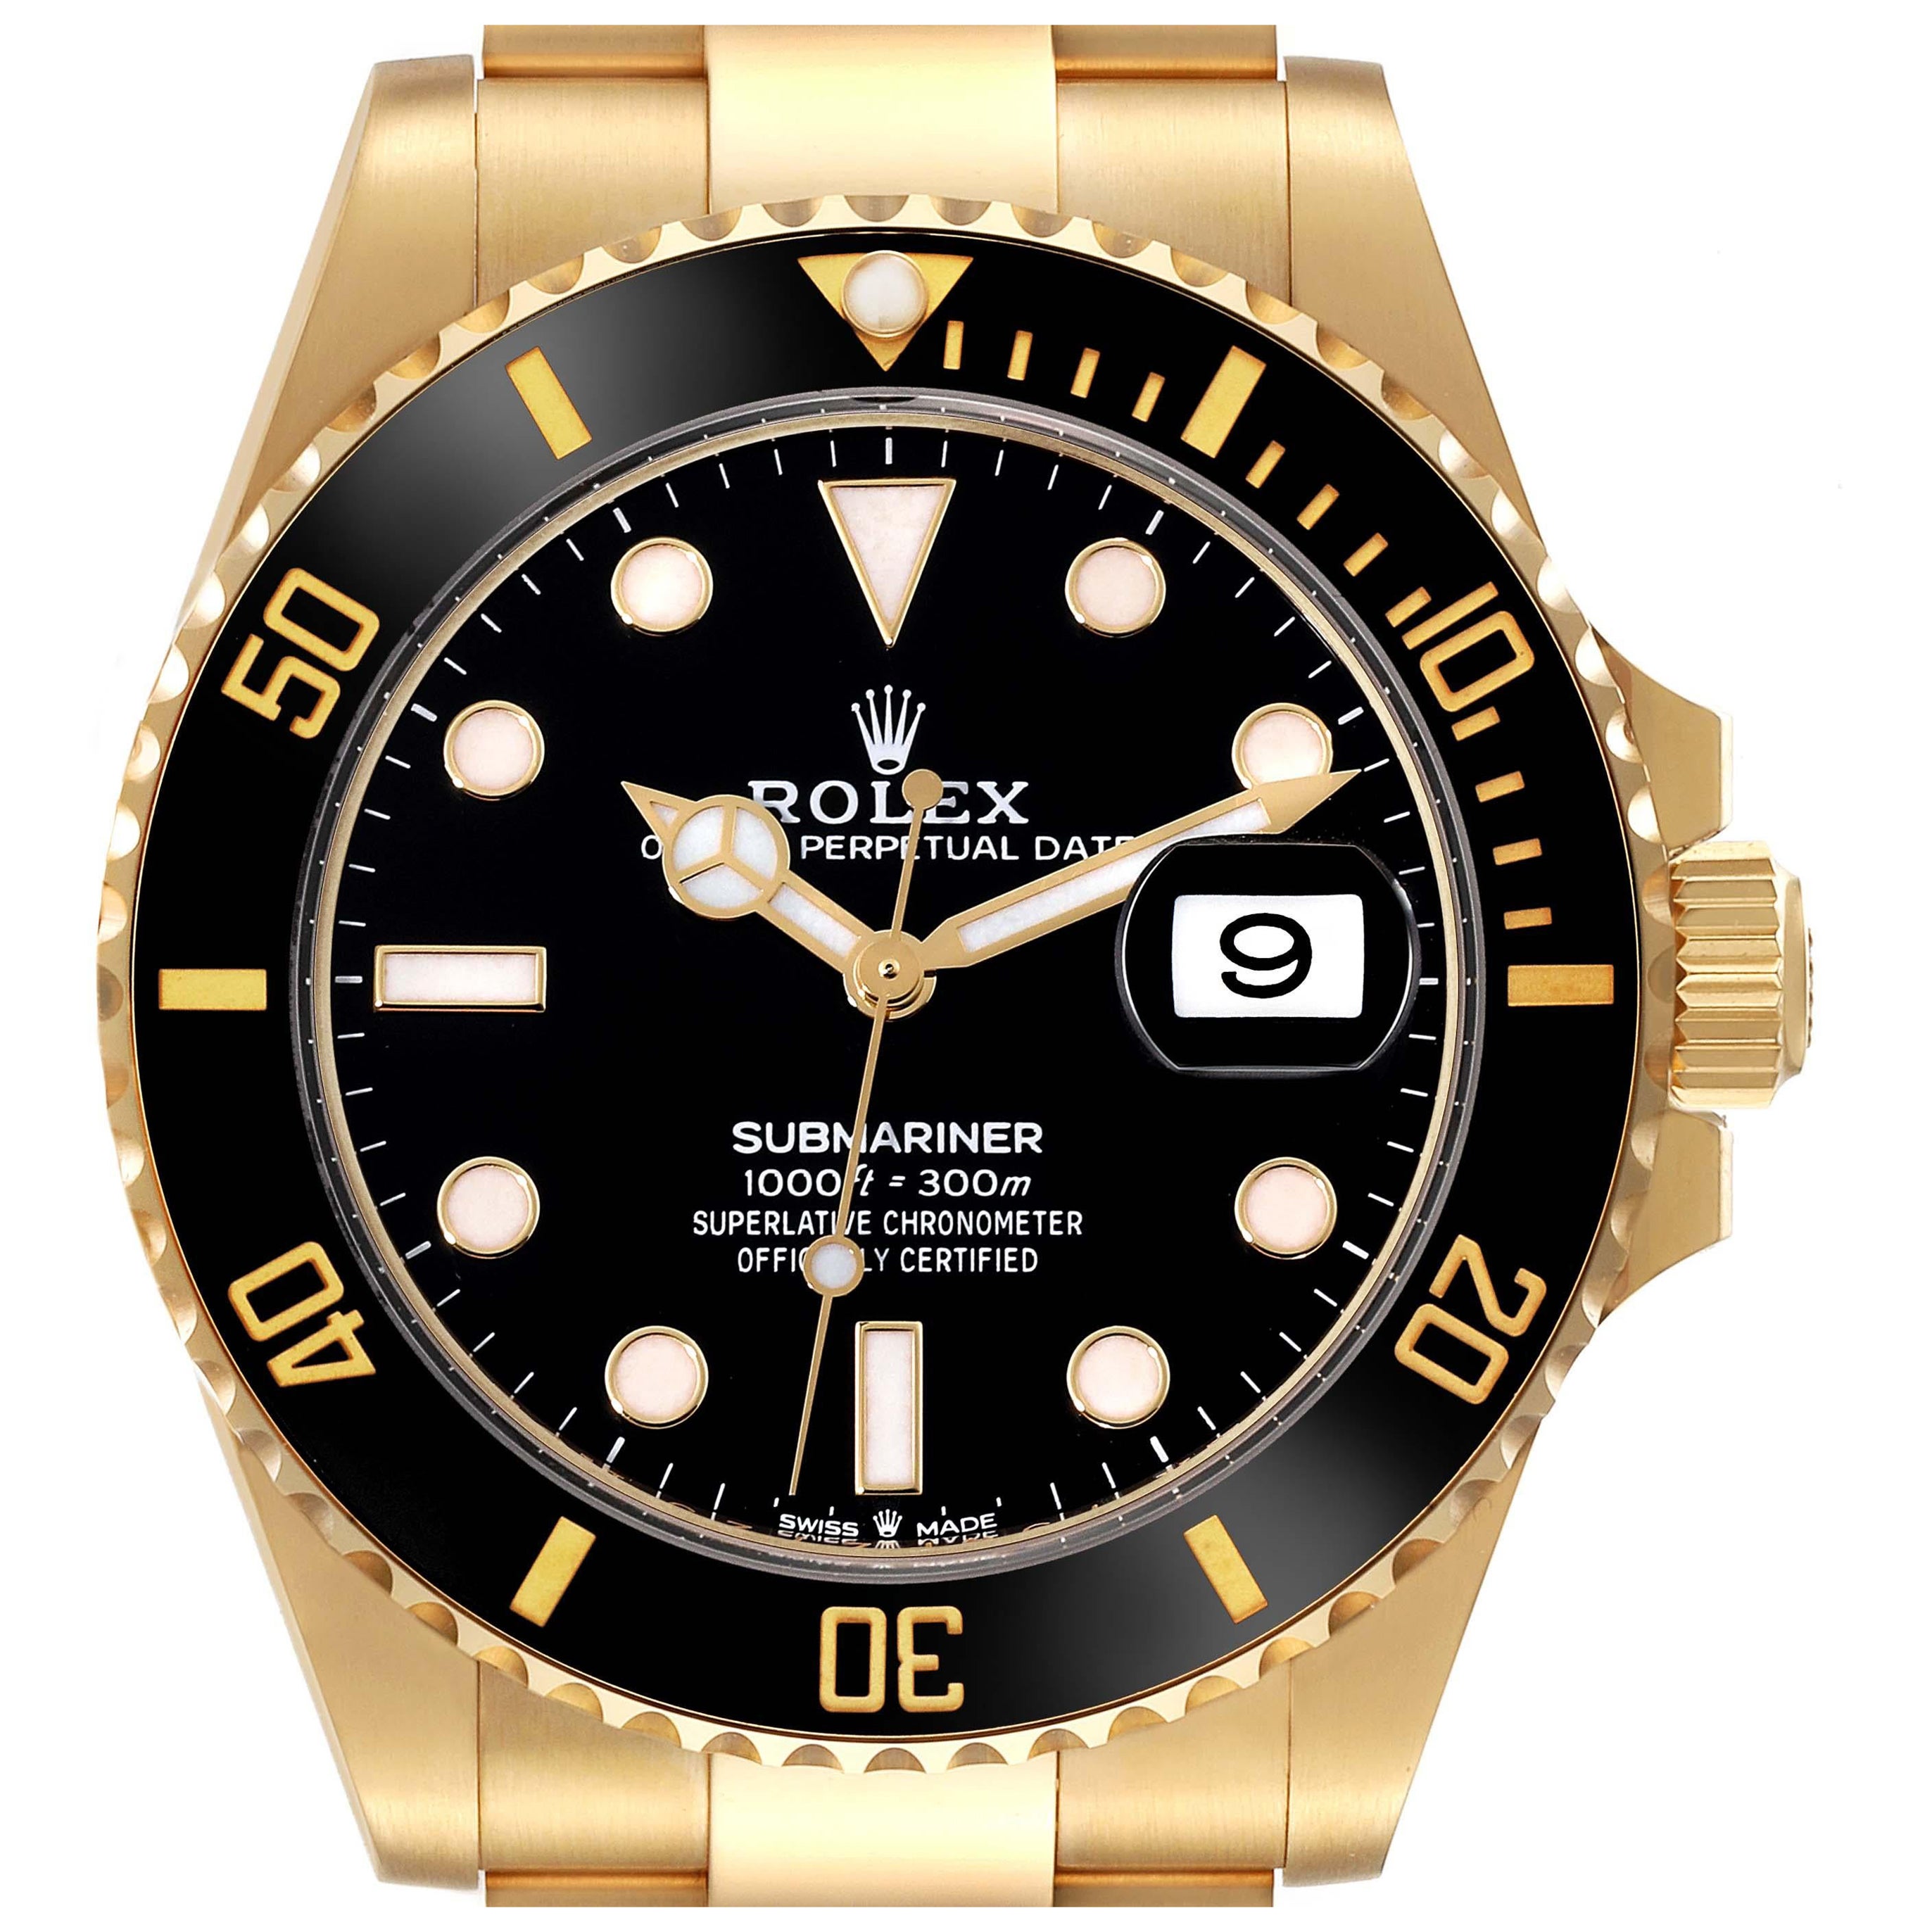 Rolex Submariner Yellow Gold Black Dial Bezel Mens Watch 126618 Box Card For Sale